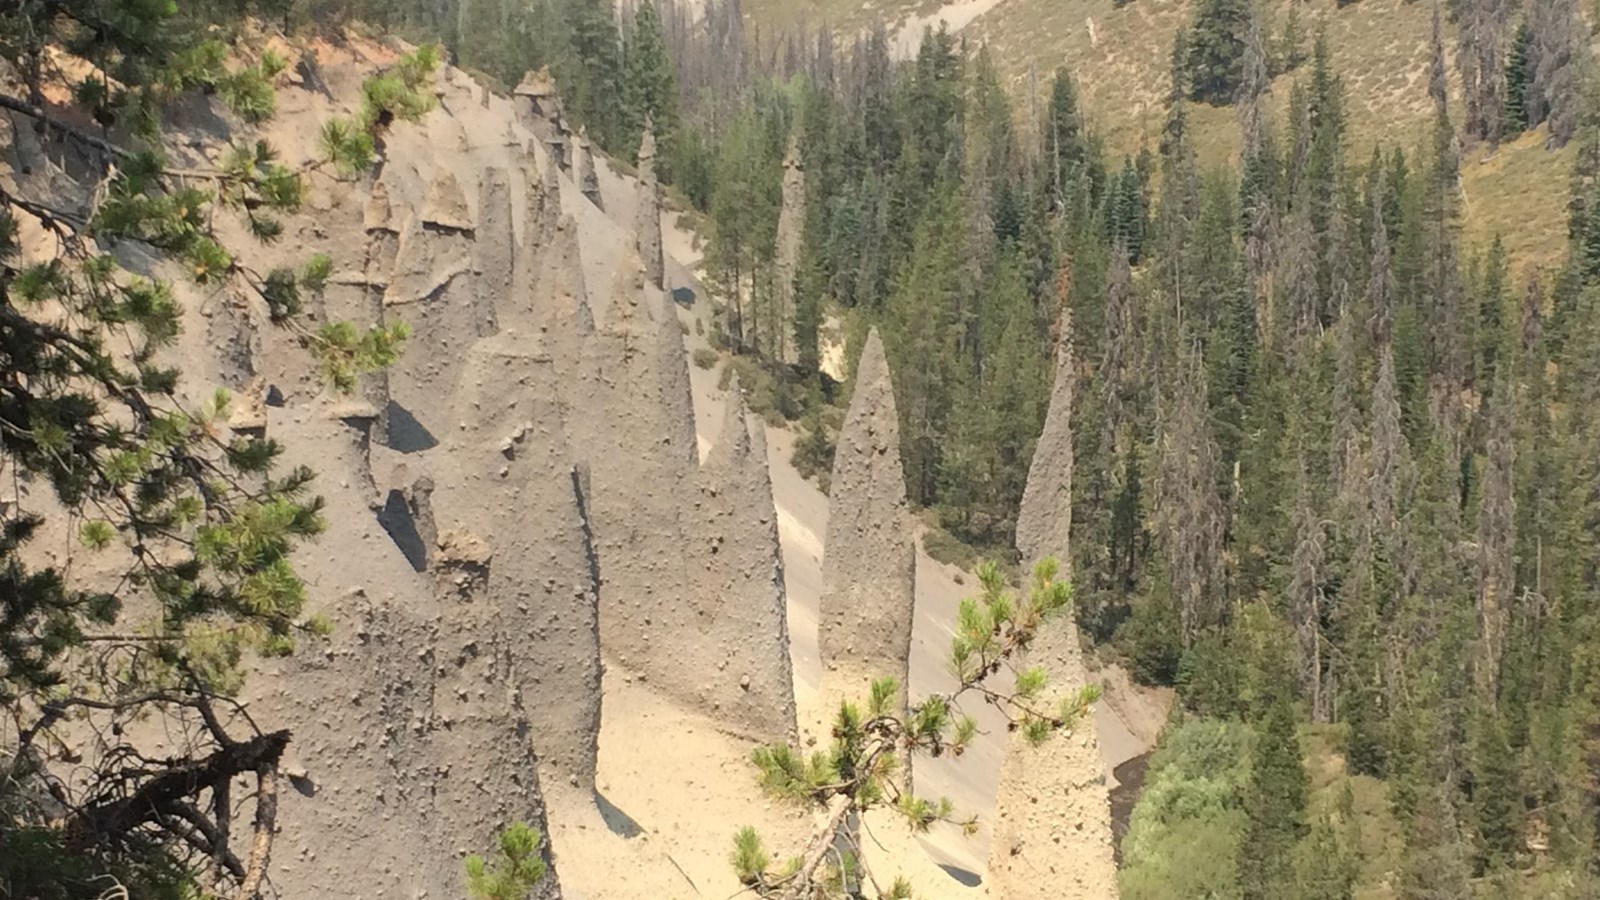 Spires of hardened volcanic matter are exposed via erosion along a canyon wall